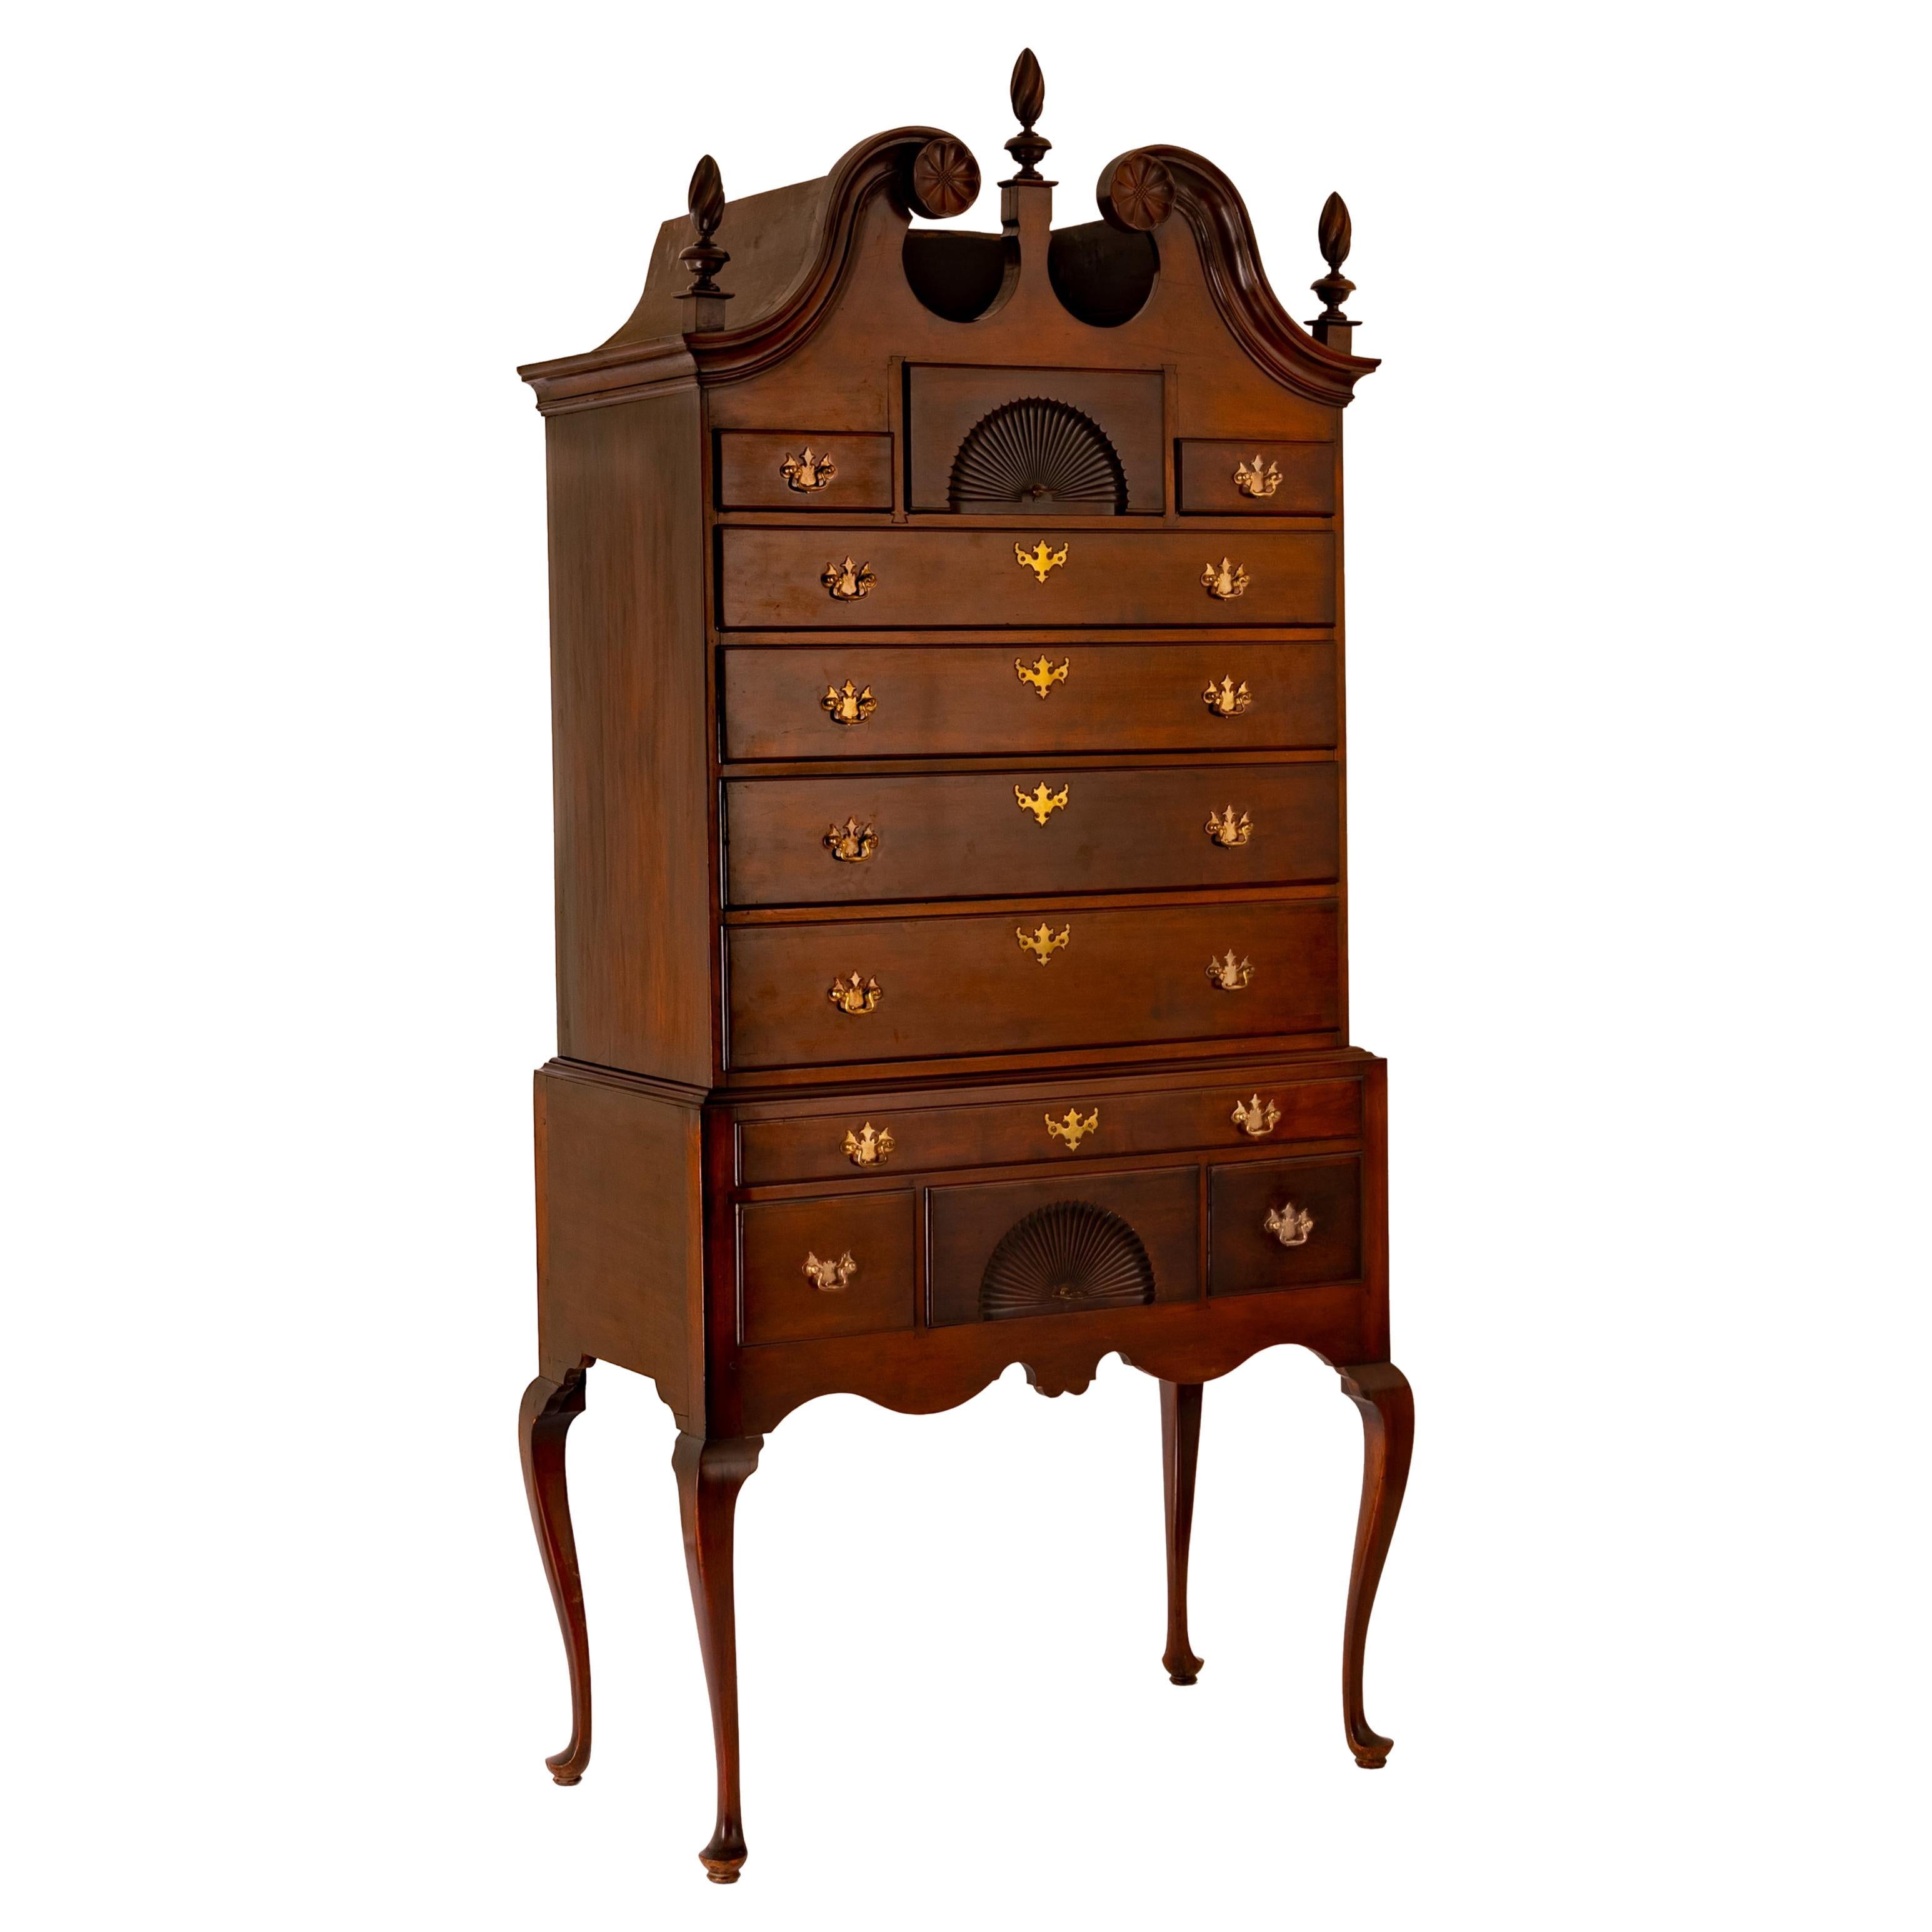 Fine antique American 18th century chippendale mahogany highboy / tall chest on stand, Salem, Massachusetts, circa 1760-1790. An near identical tall chest sold January 20th 2023 for $37,800 at Christie's New York.
The highboy having two sections,